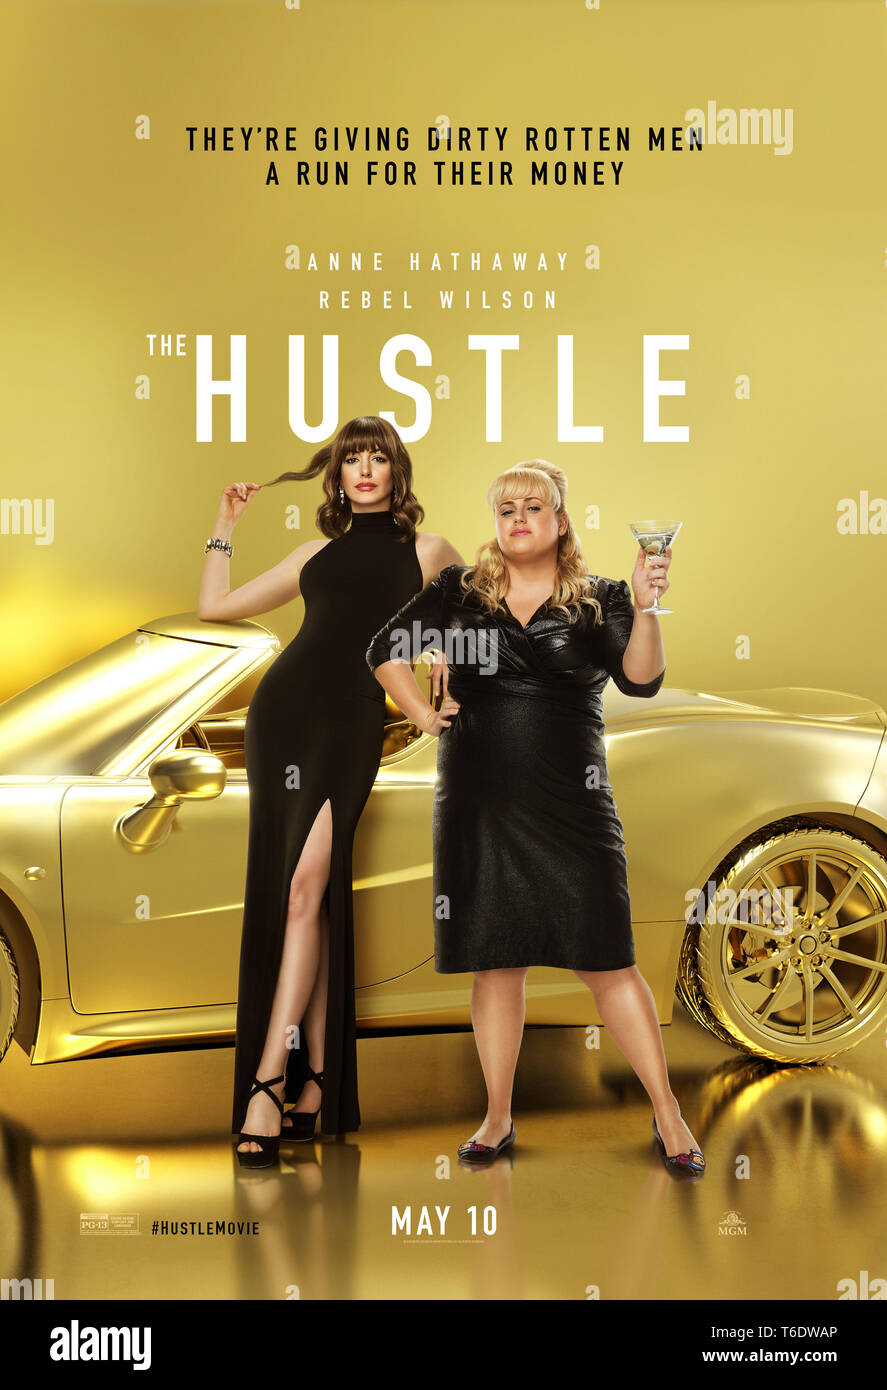 RELEASE DATE: May 10, 2019 TITLE: The Hustle STUDIO: MGM DIRECTOR: Chris Addison PLOT: A remake of the 1988 comedy, 'Dirty Rotten Scoundrels', in which two down-and-out con artists engage in a 'loser leaves town' contest. STARRING: REBEL WILSON as Penny Rust, ANNE HATHAWAY as Josephine Chesterfield posters art. (Credit Image: © MGM/Entertainment Pictures) Stock Photo